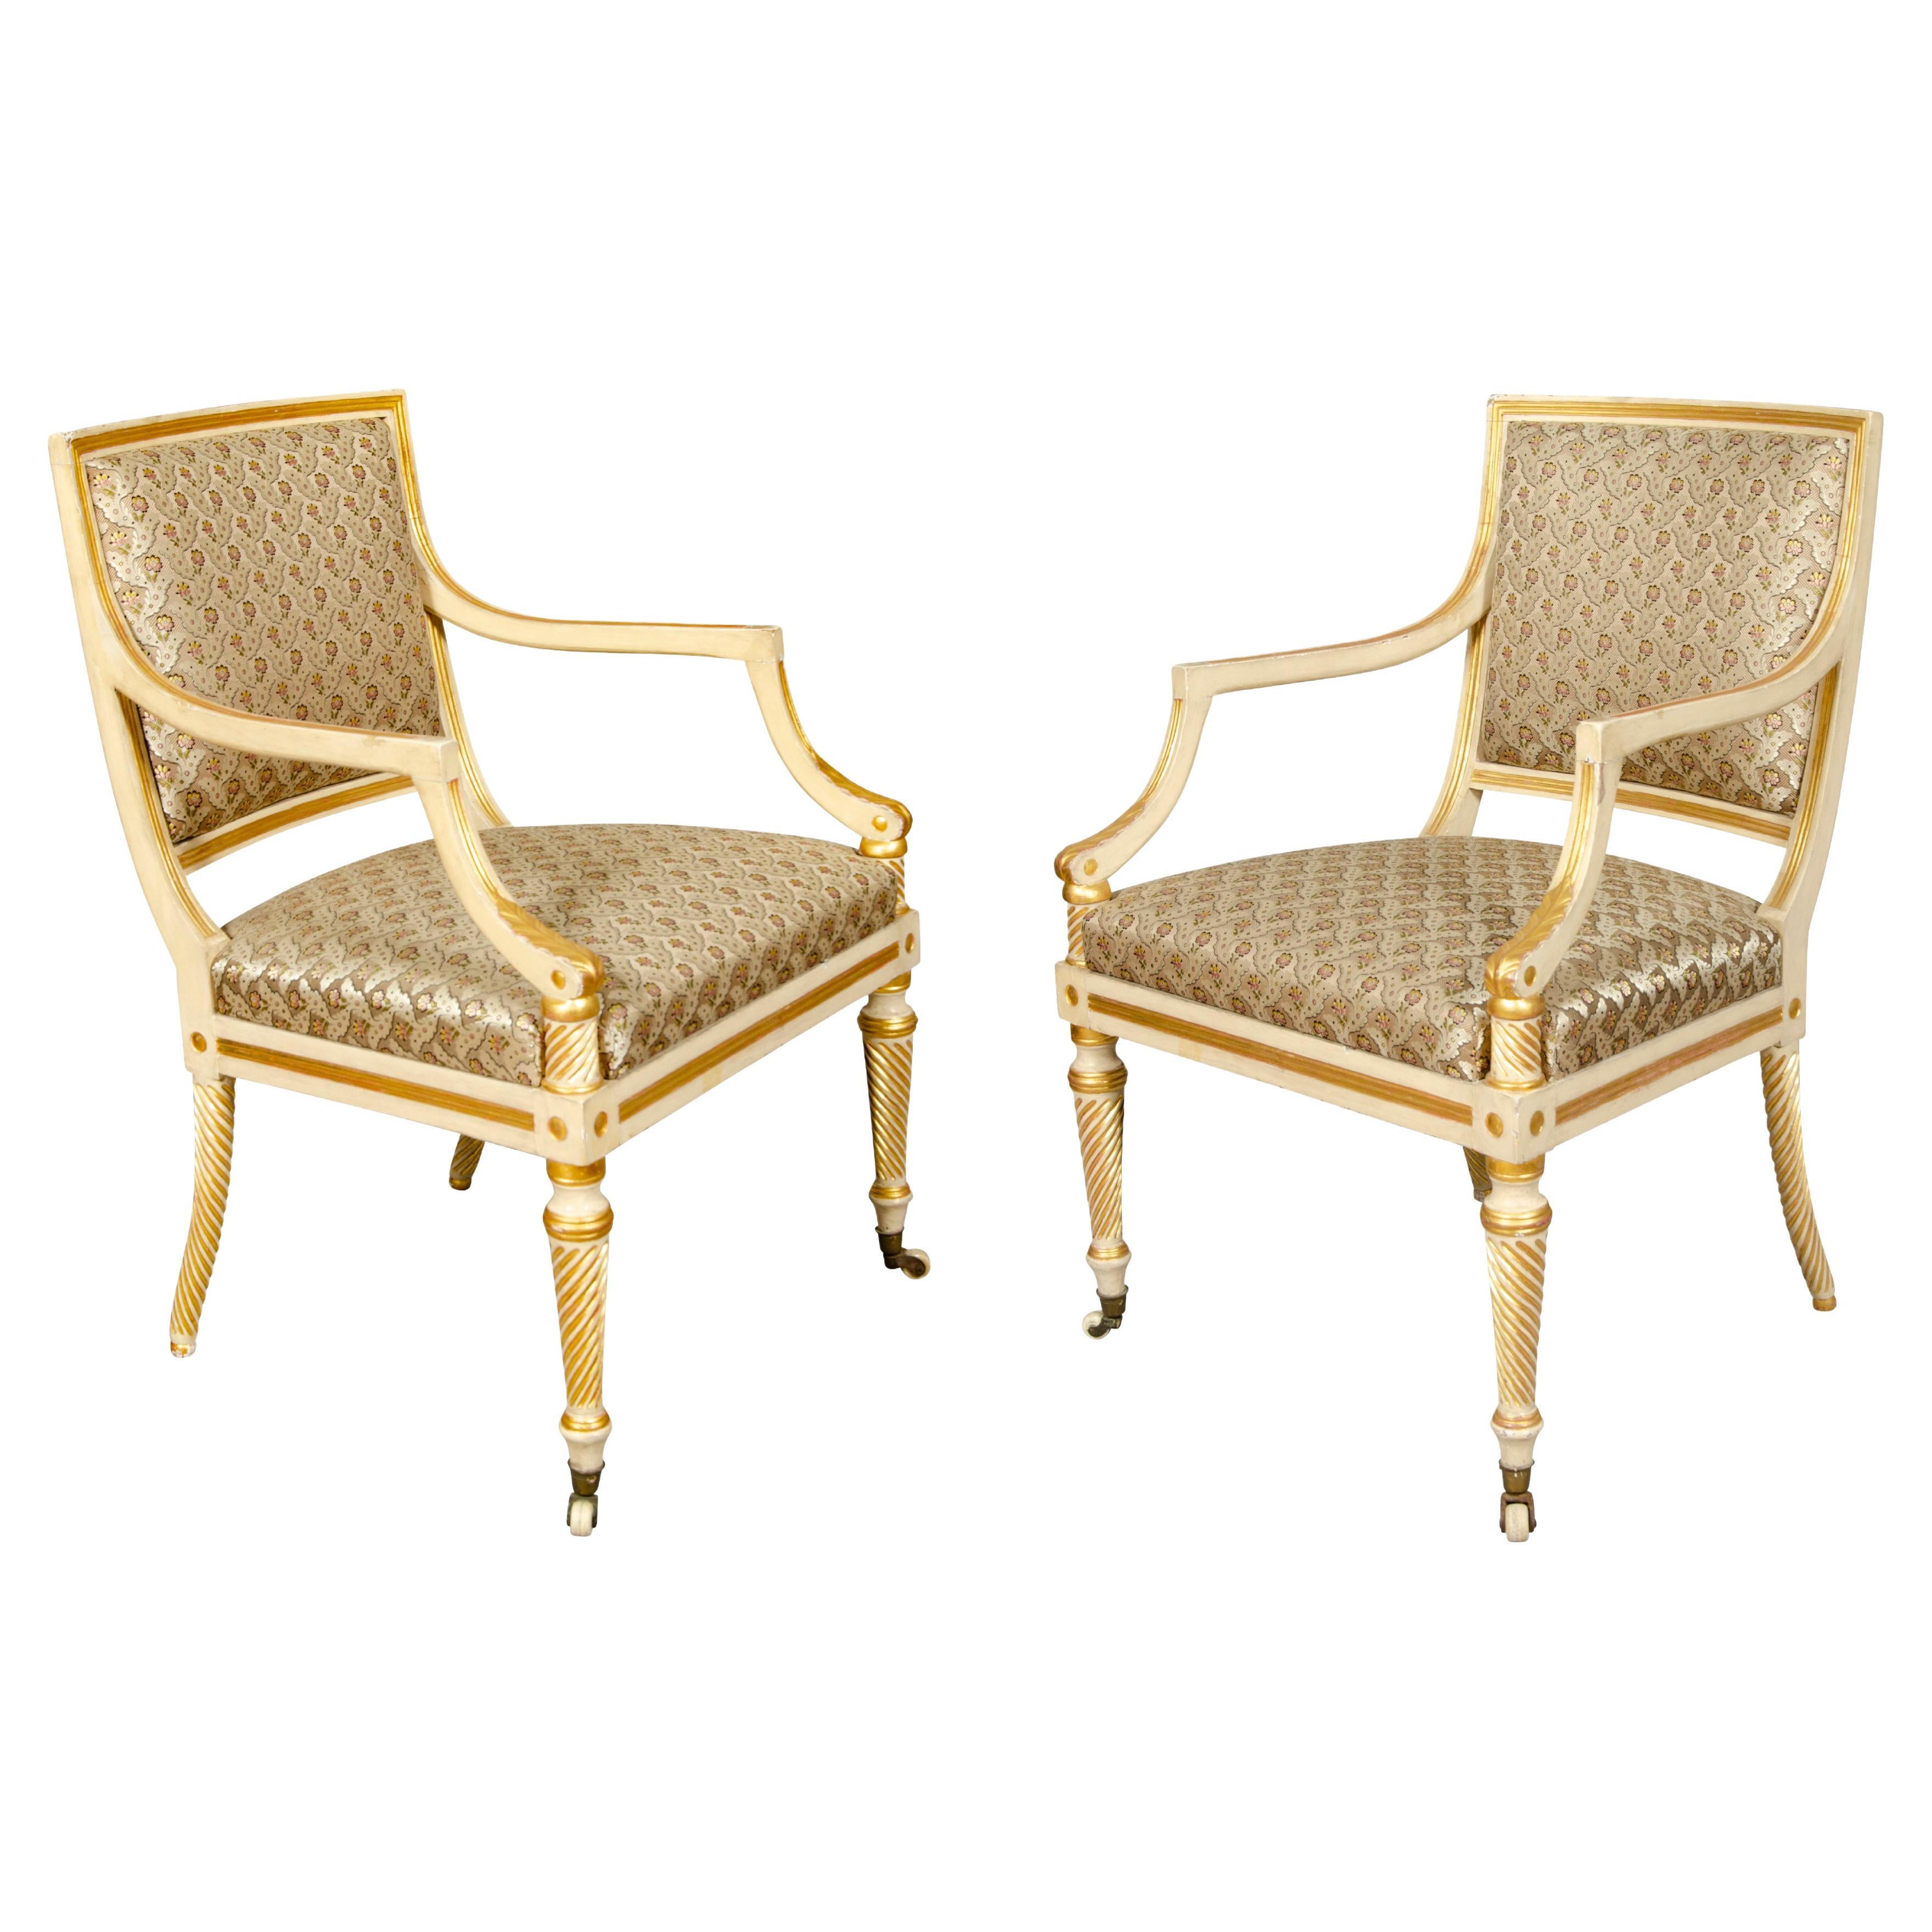 Pair of Regency Painted and Gilded Armchairs For Sale at 1stDibs